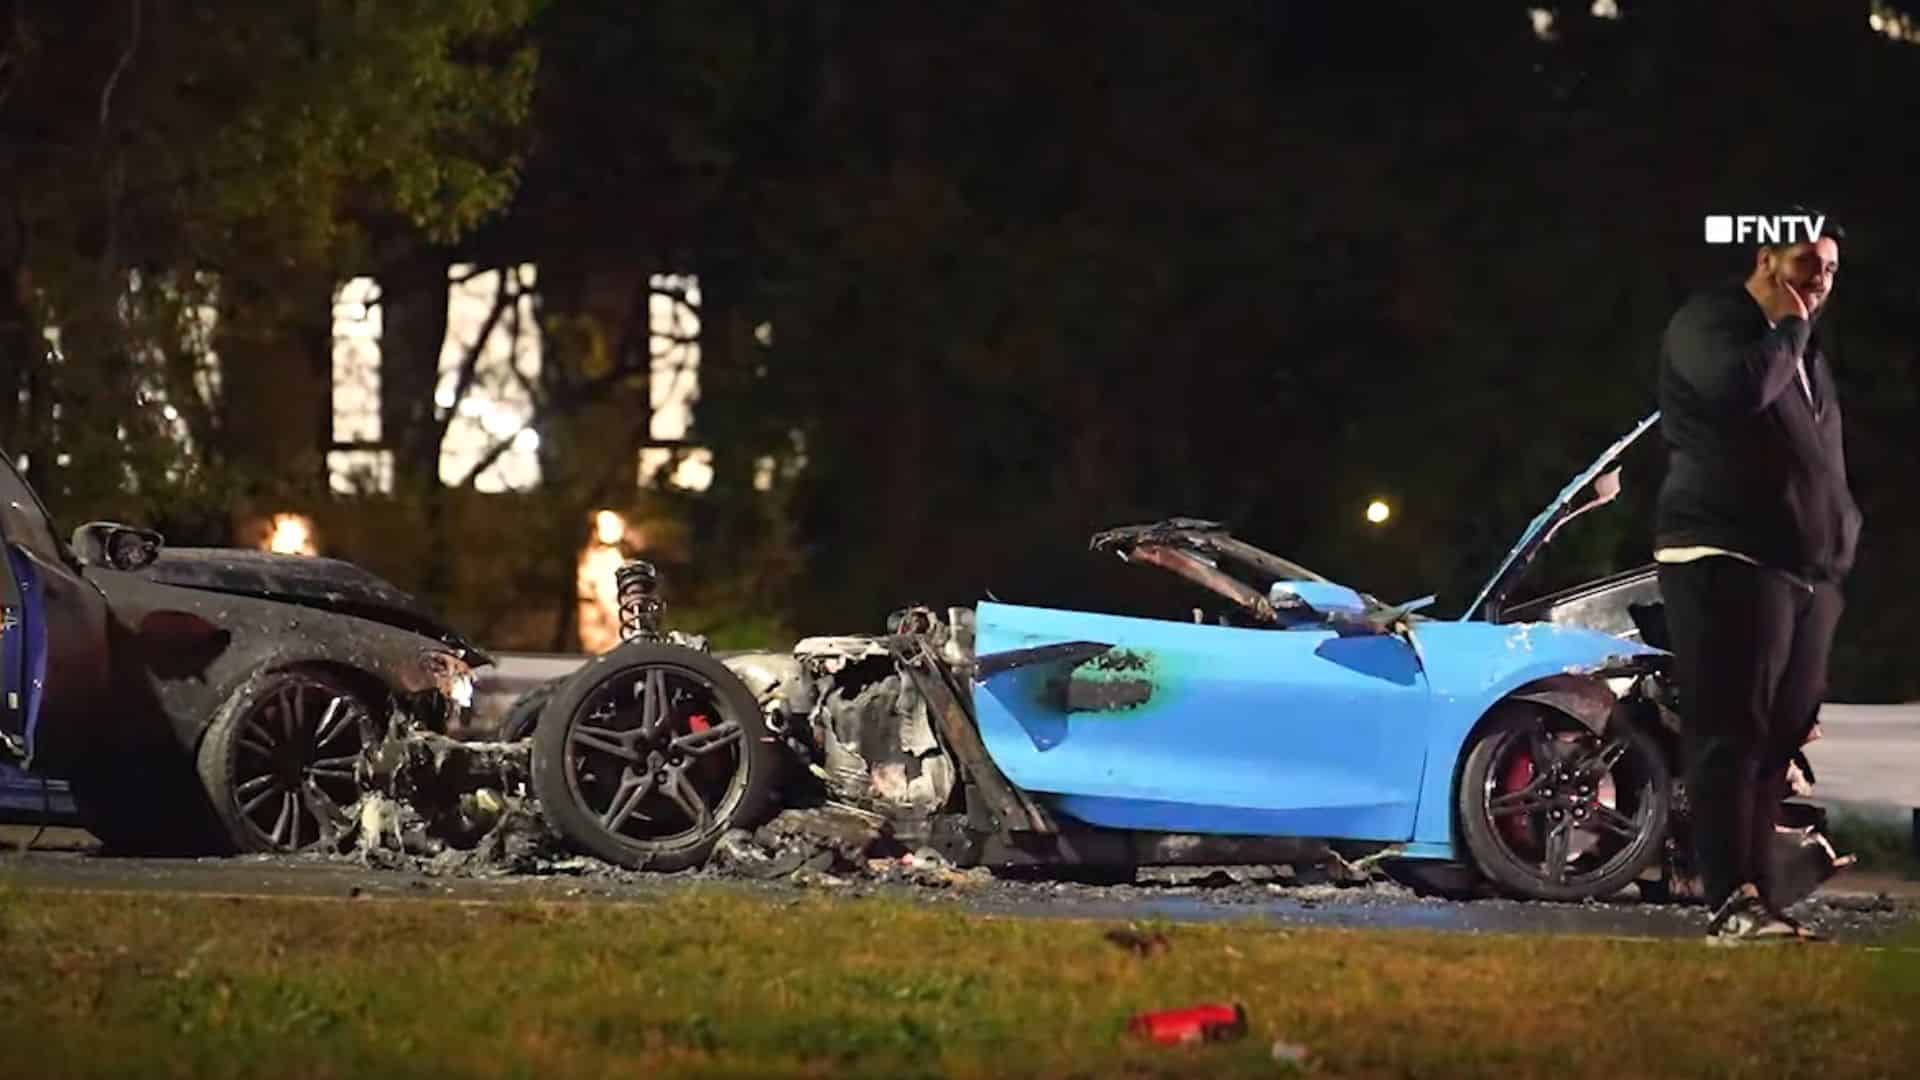 C8 Corvette And BMW Crash, Catching On Fire